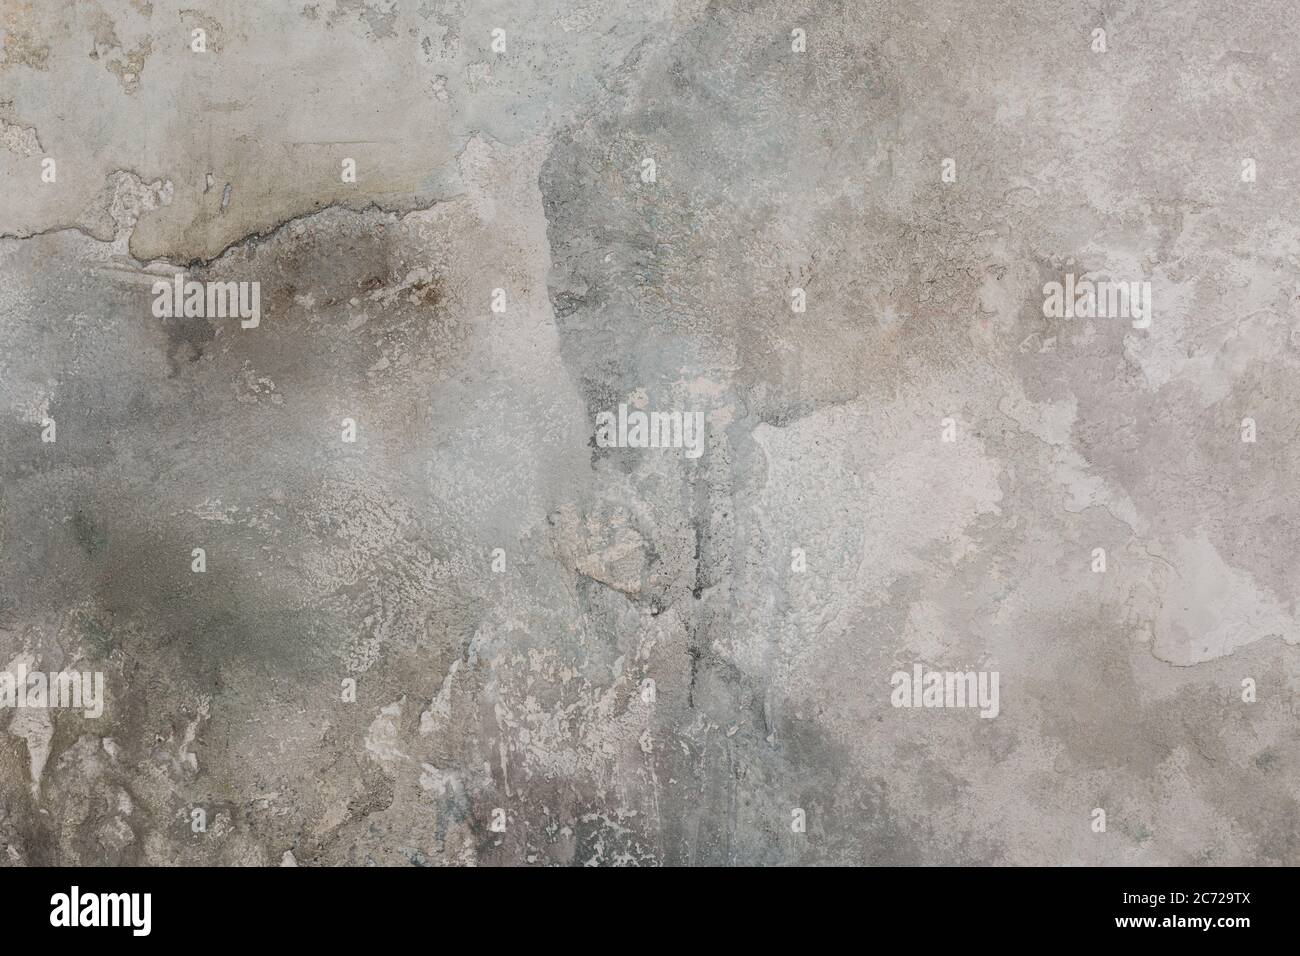 Cement wall background. Texture placed over an object to create a grunge effect for your design. Stock Photo